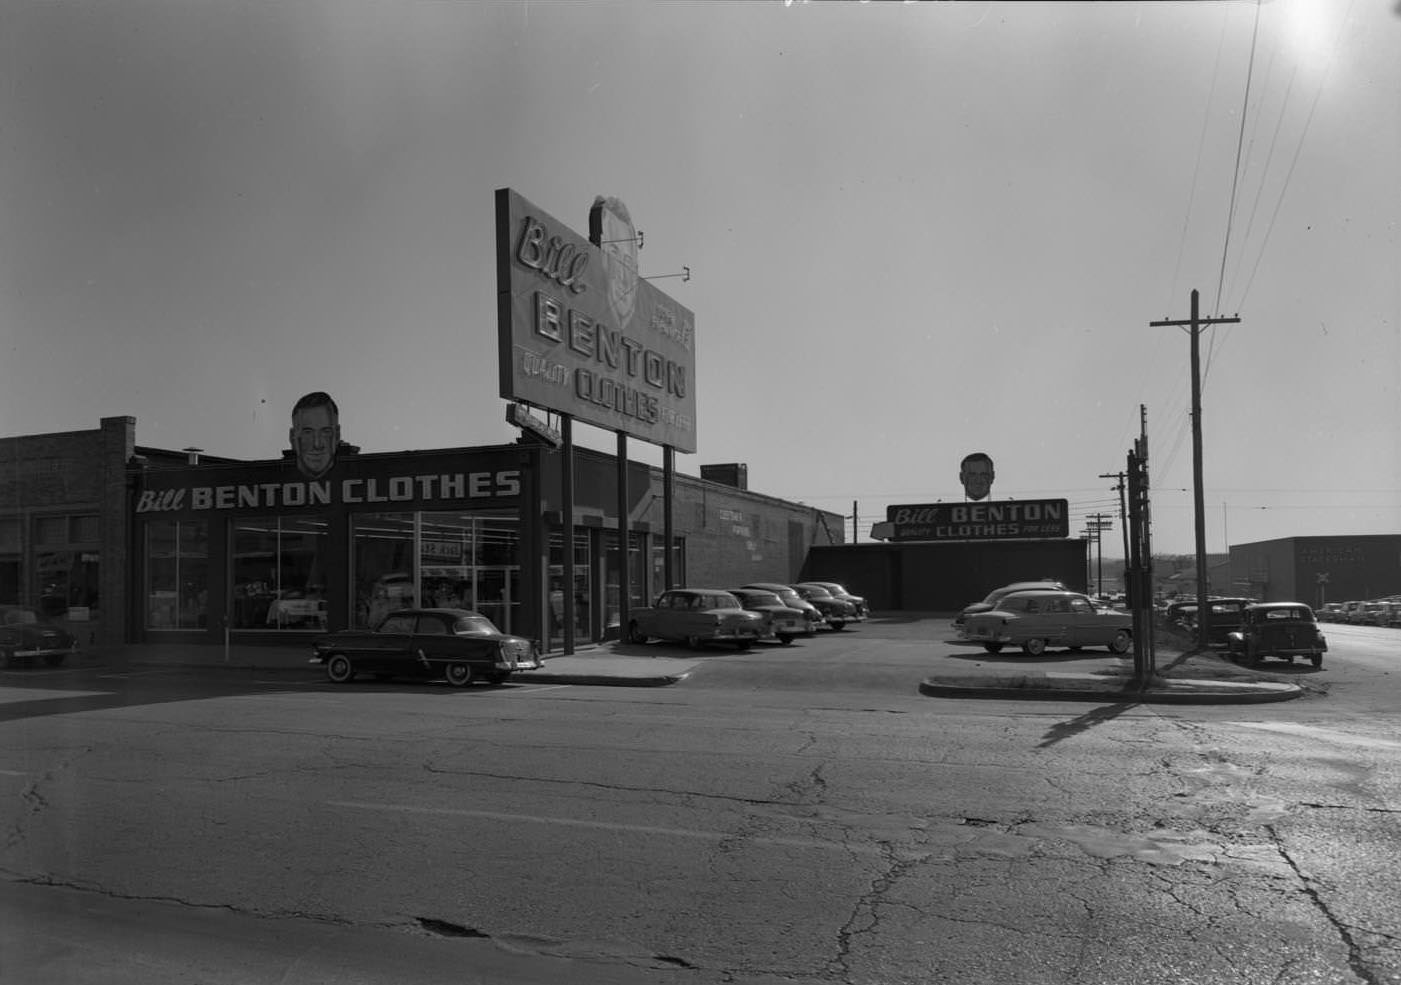 Exterior view of Bill Benton's Men's Clothing Store which was located at 309 W. 5th Street, 1955